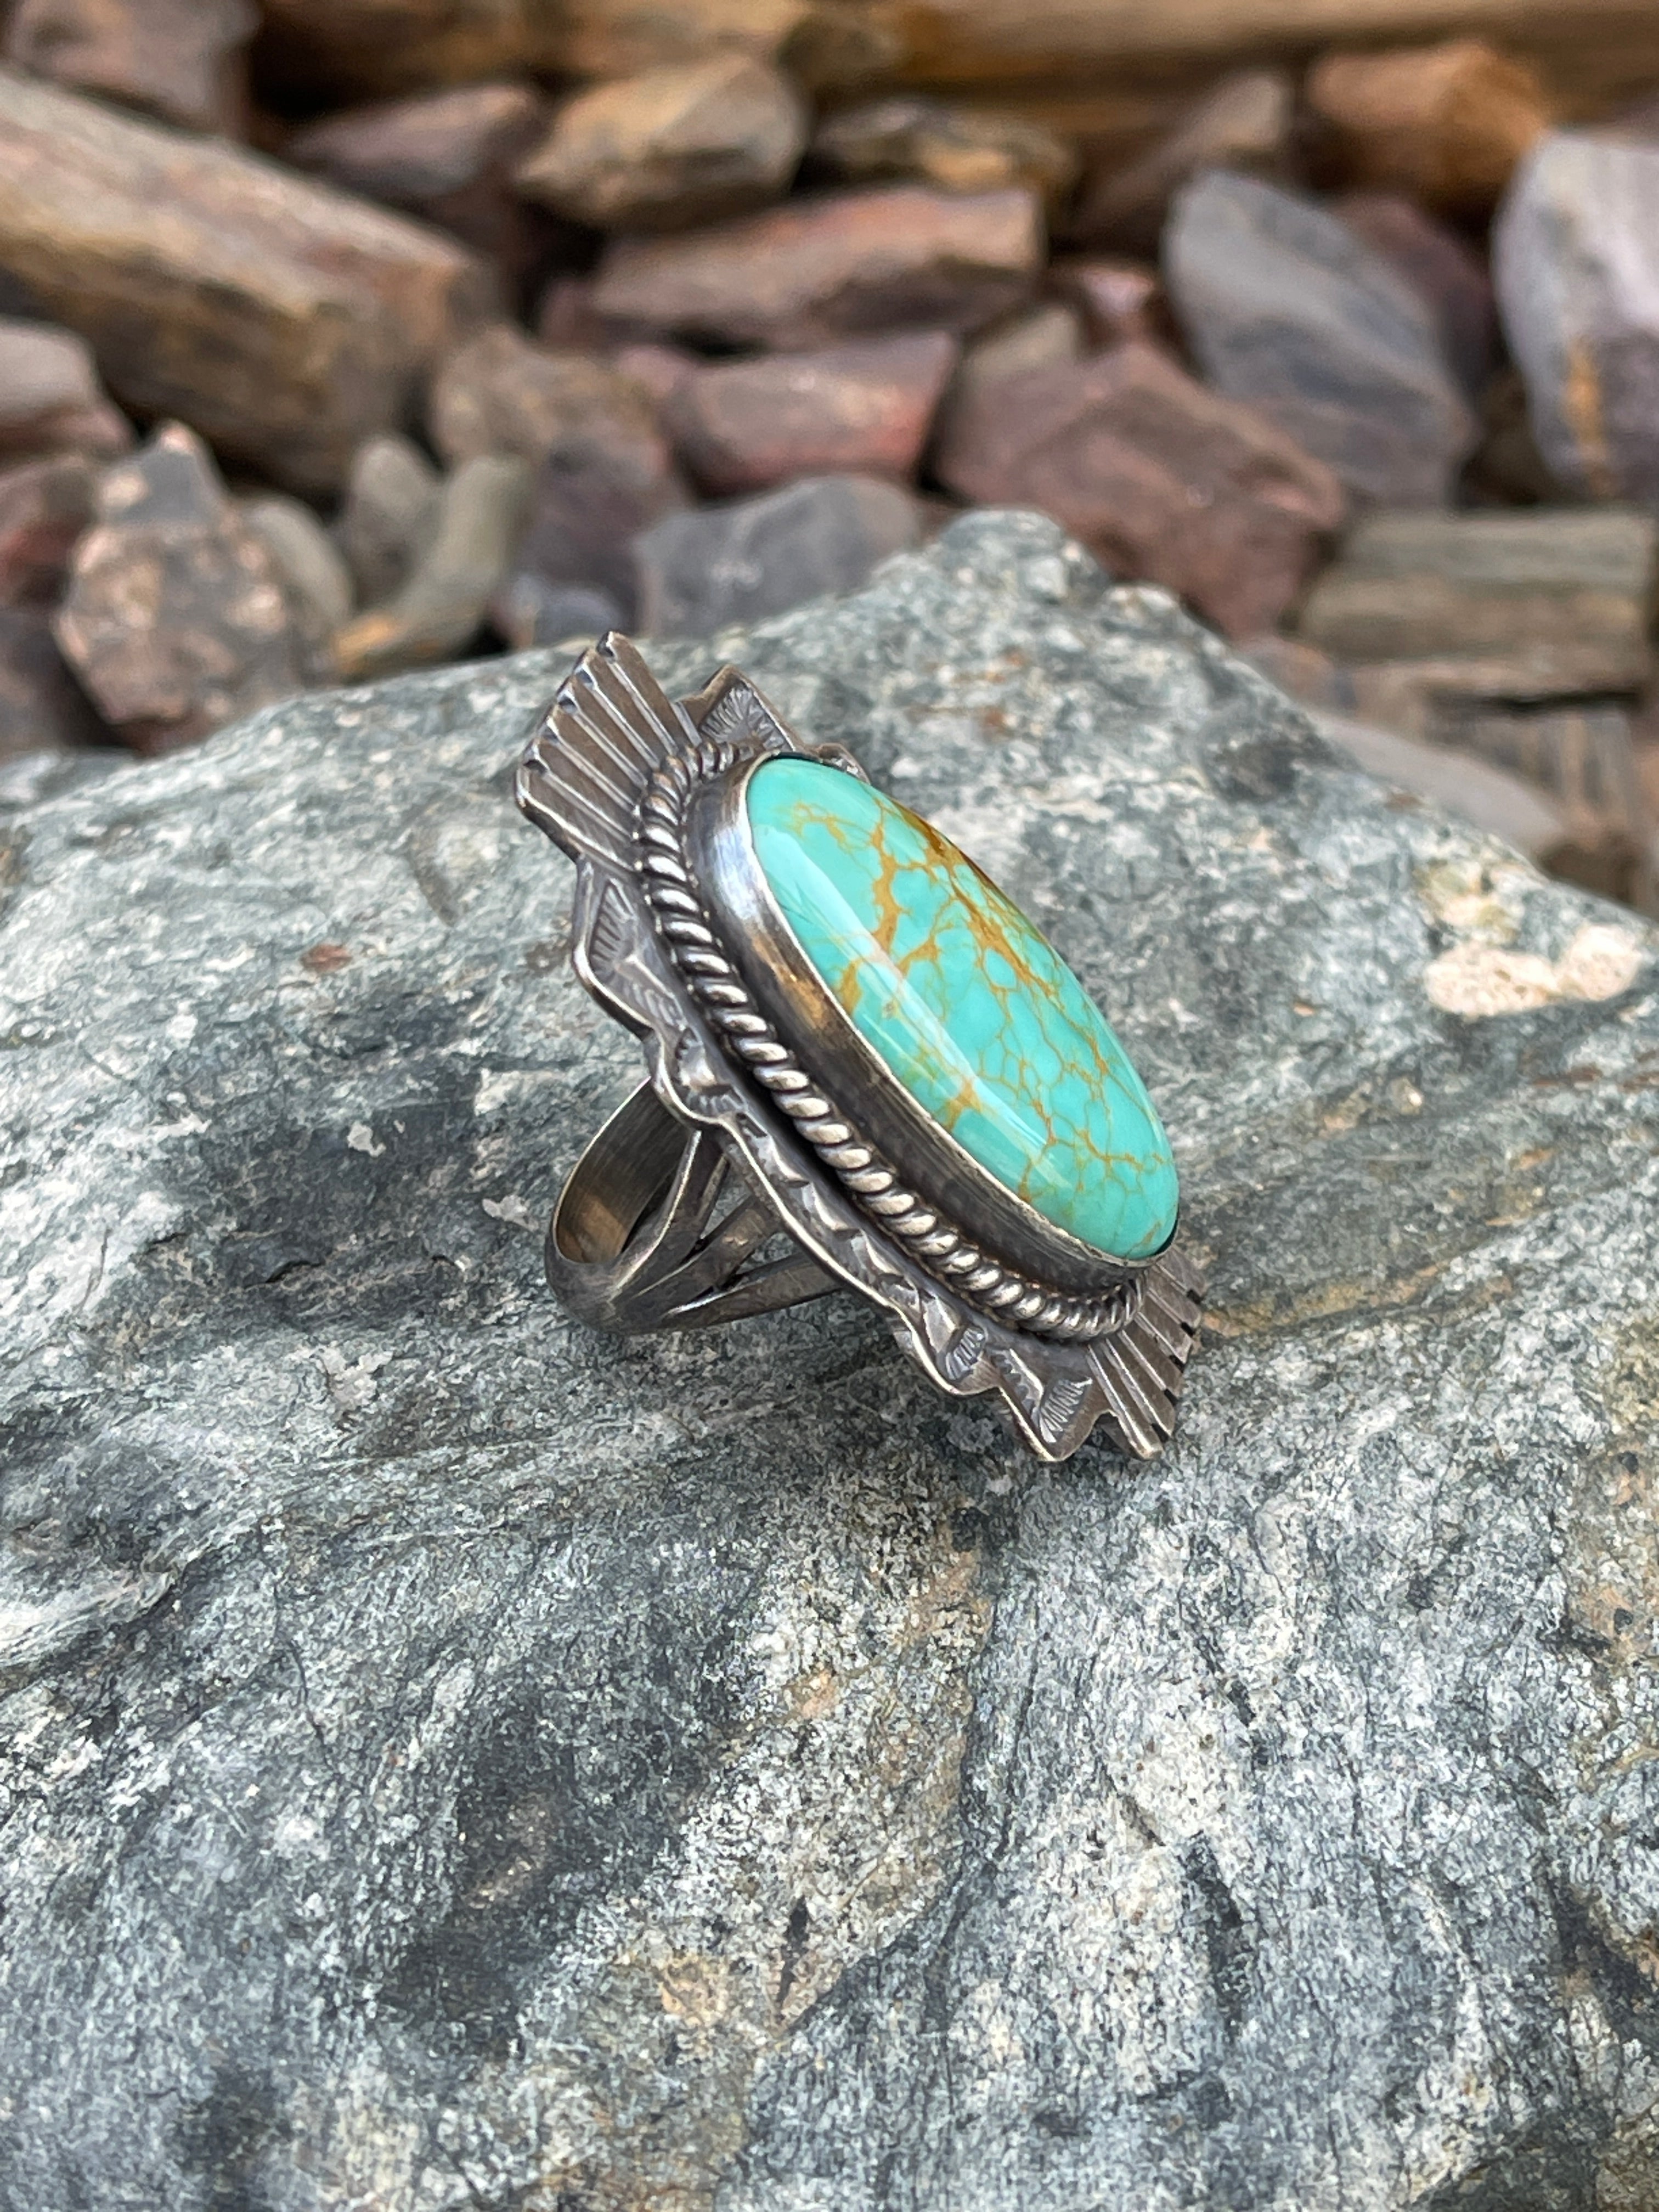 Copy of Large Handmade Solid Sterling Silver Kingman Turquoise Ring with Satin Finish - Size 7 1/2